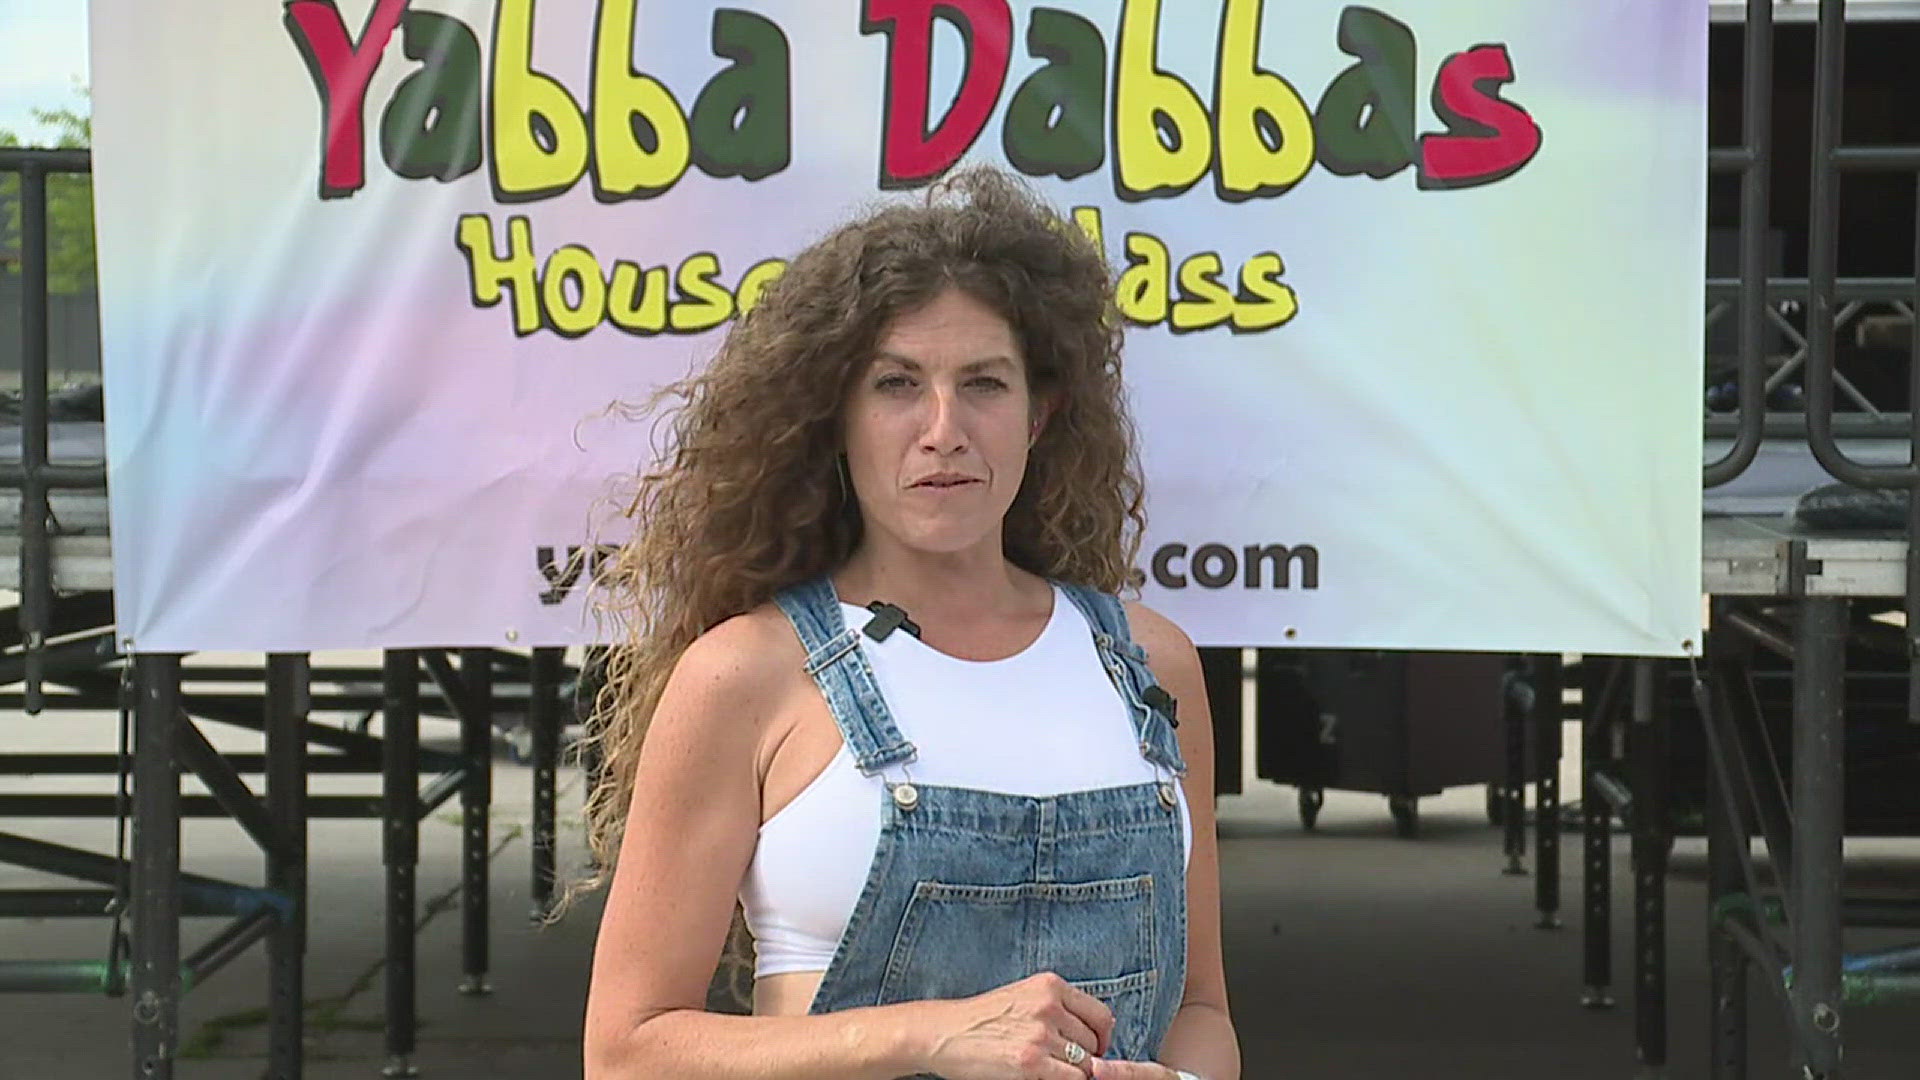 Festival sponsor Heather Dabbas, the owner of Yabba Dabbas House of Glass, joined The Current on News 8 to talk about everything in store for the two-day event.